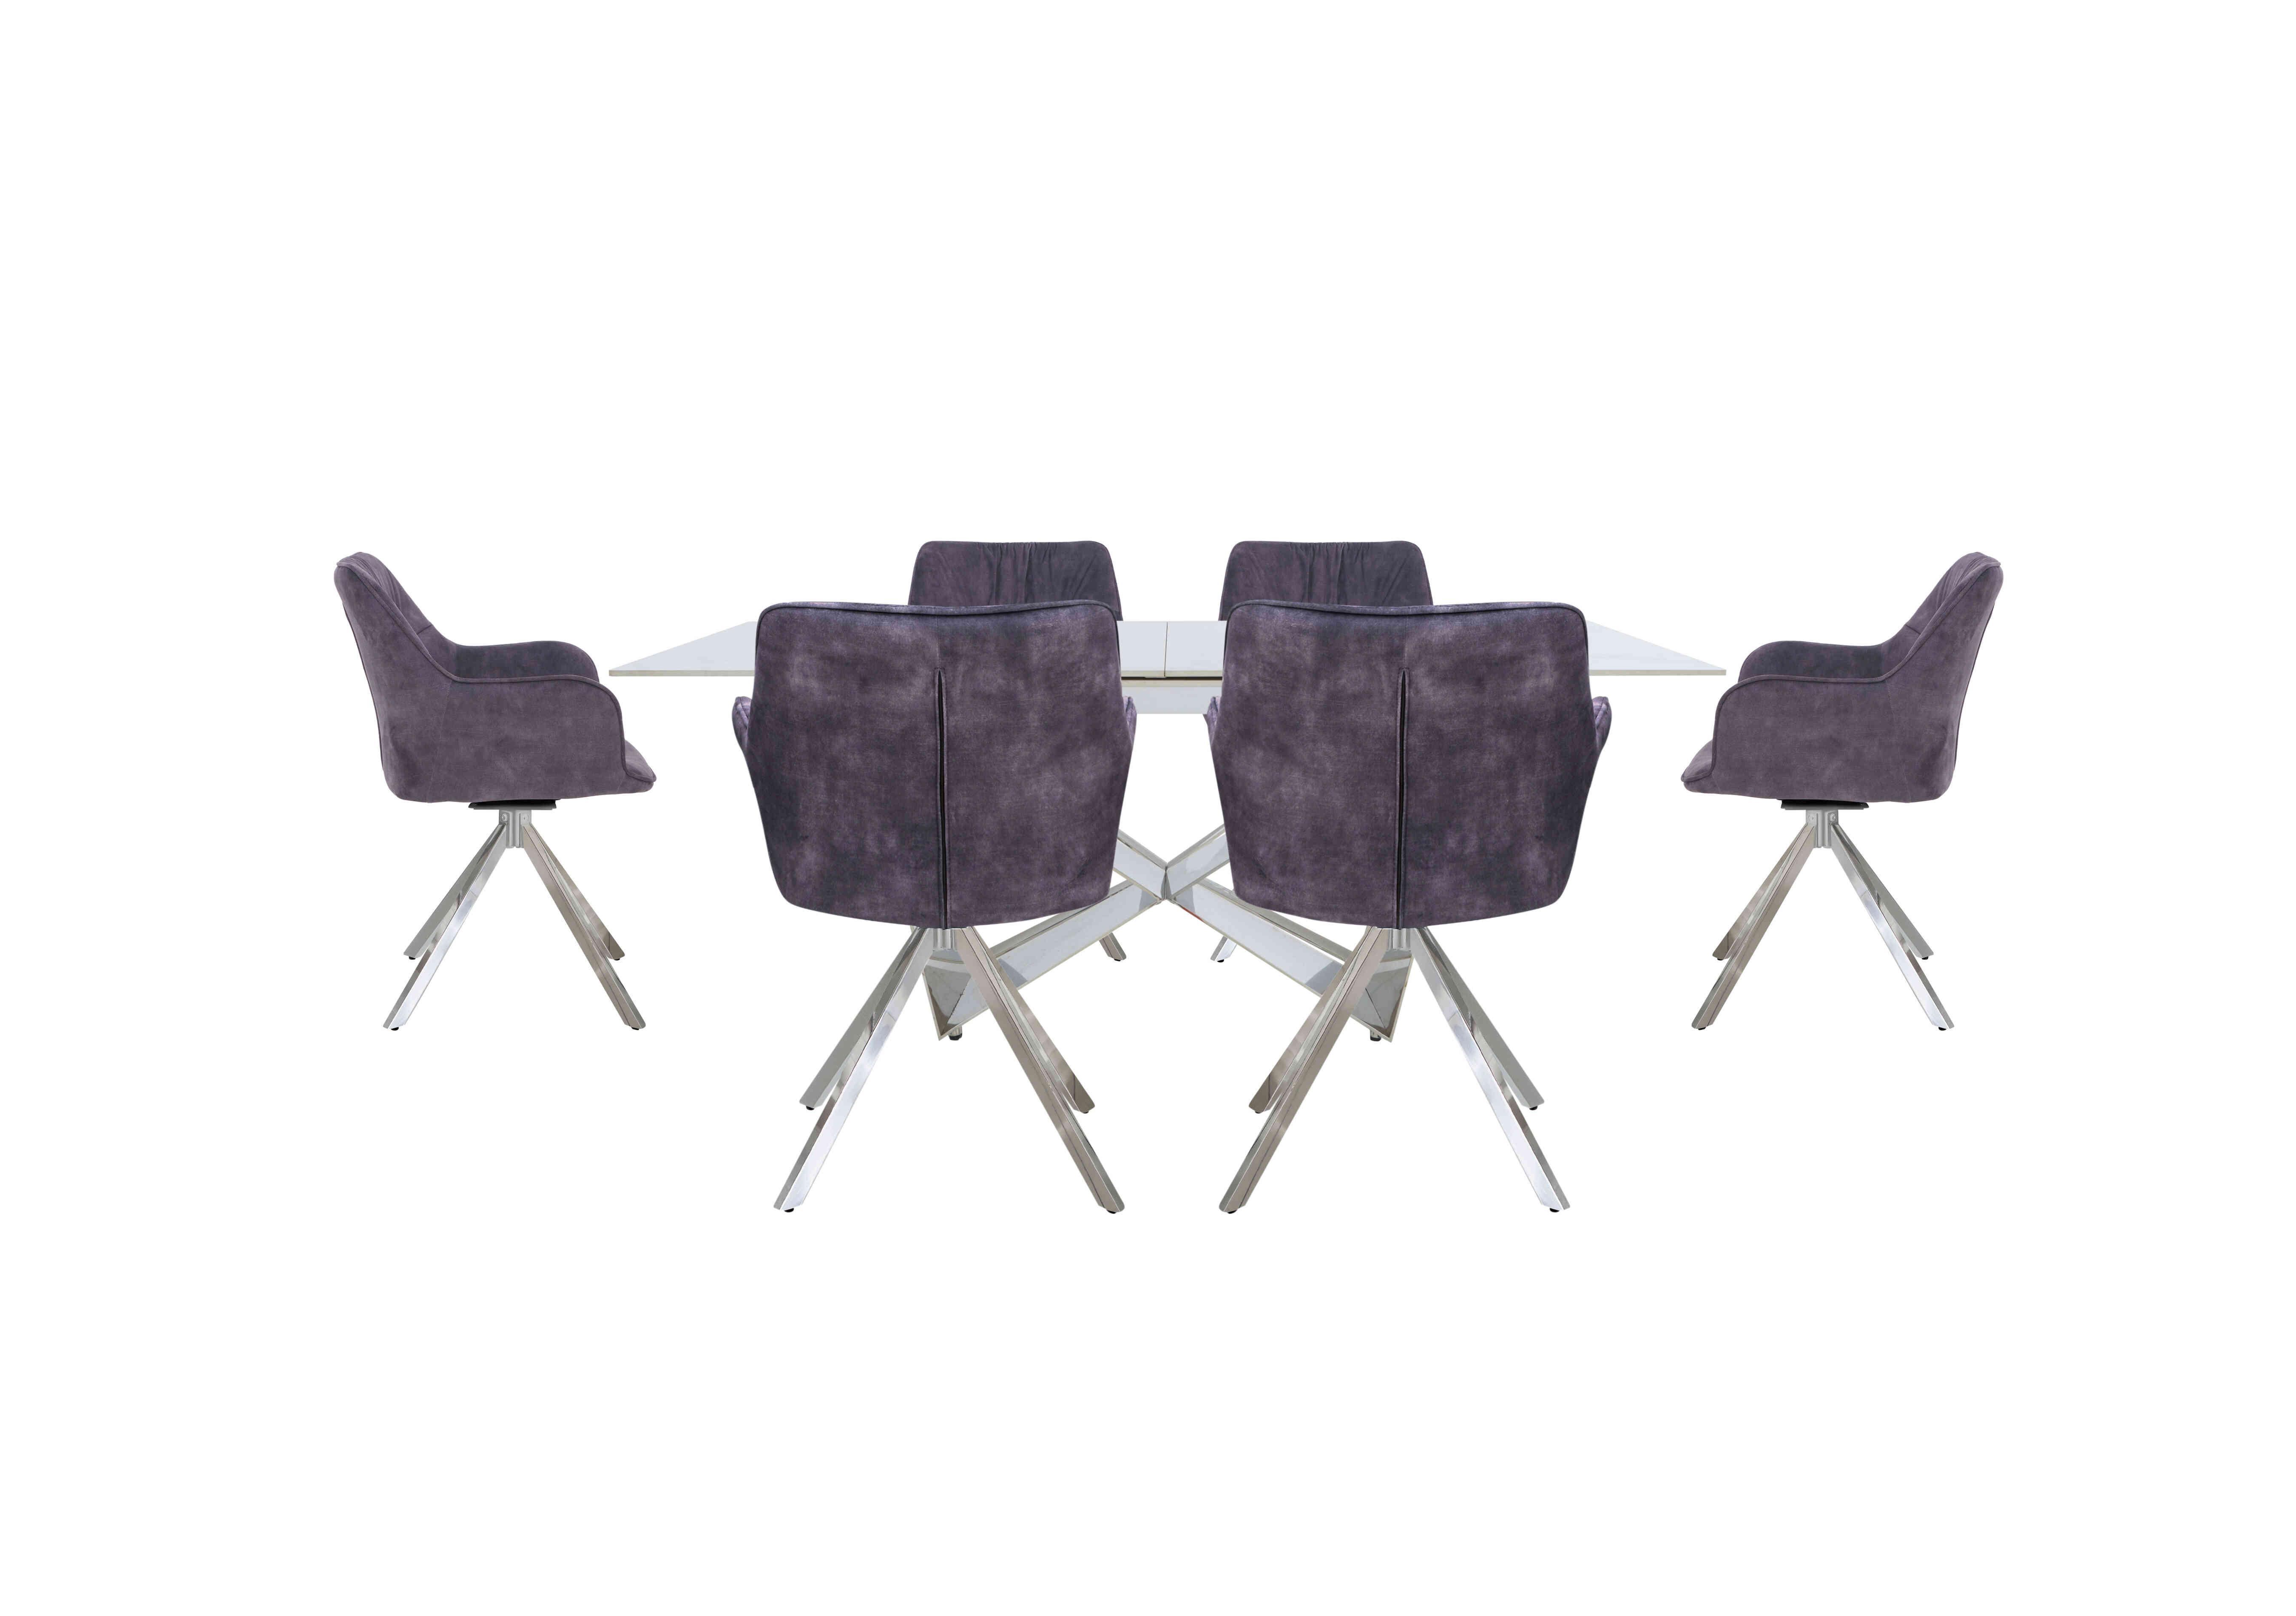 Marvel Chrome Large Extending Dining Table and 6 Swivel Dining Chairs in Charcoal on Furniture Village